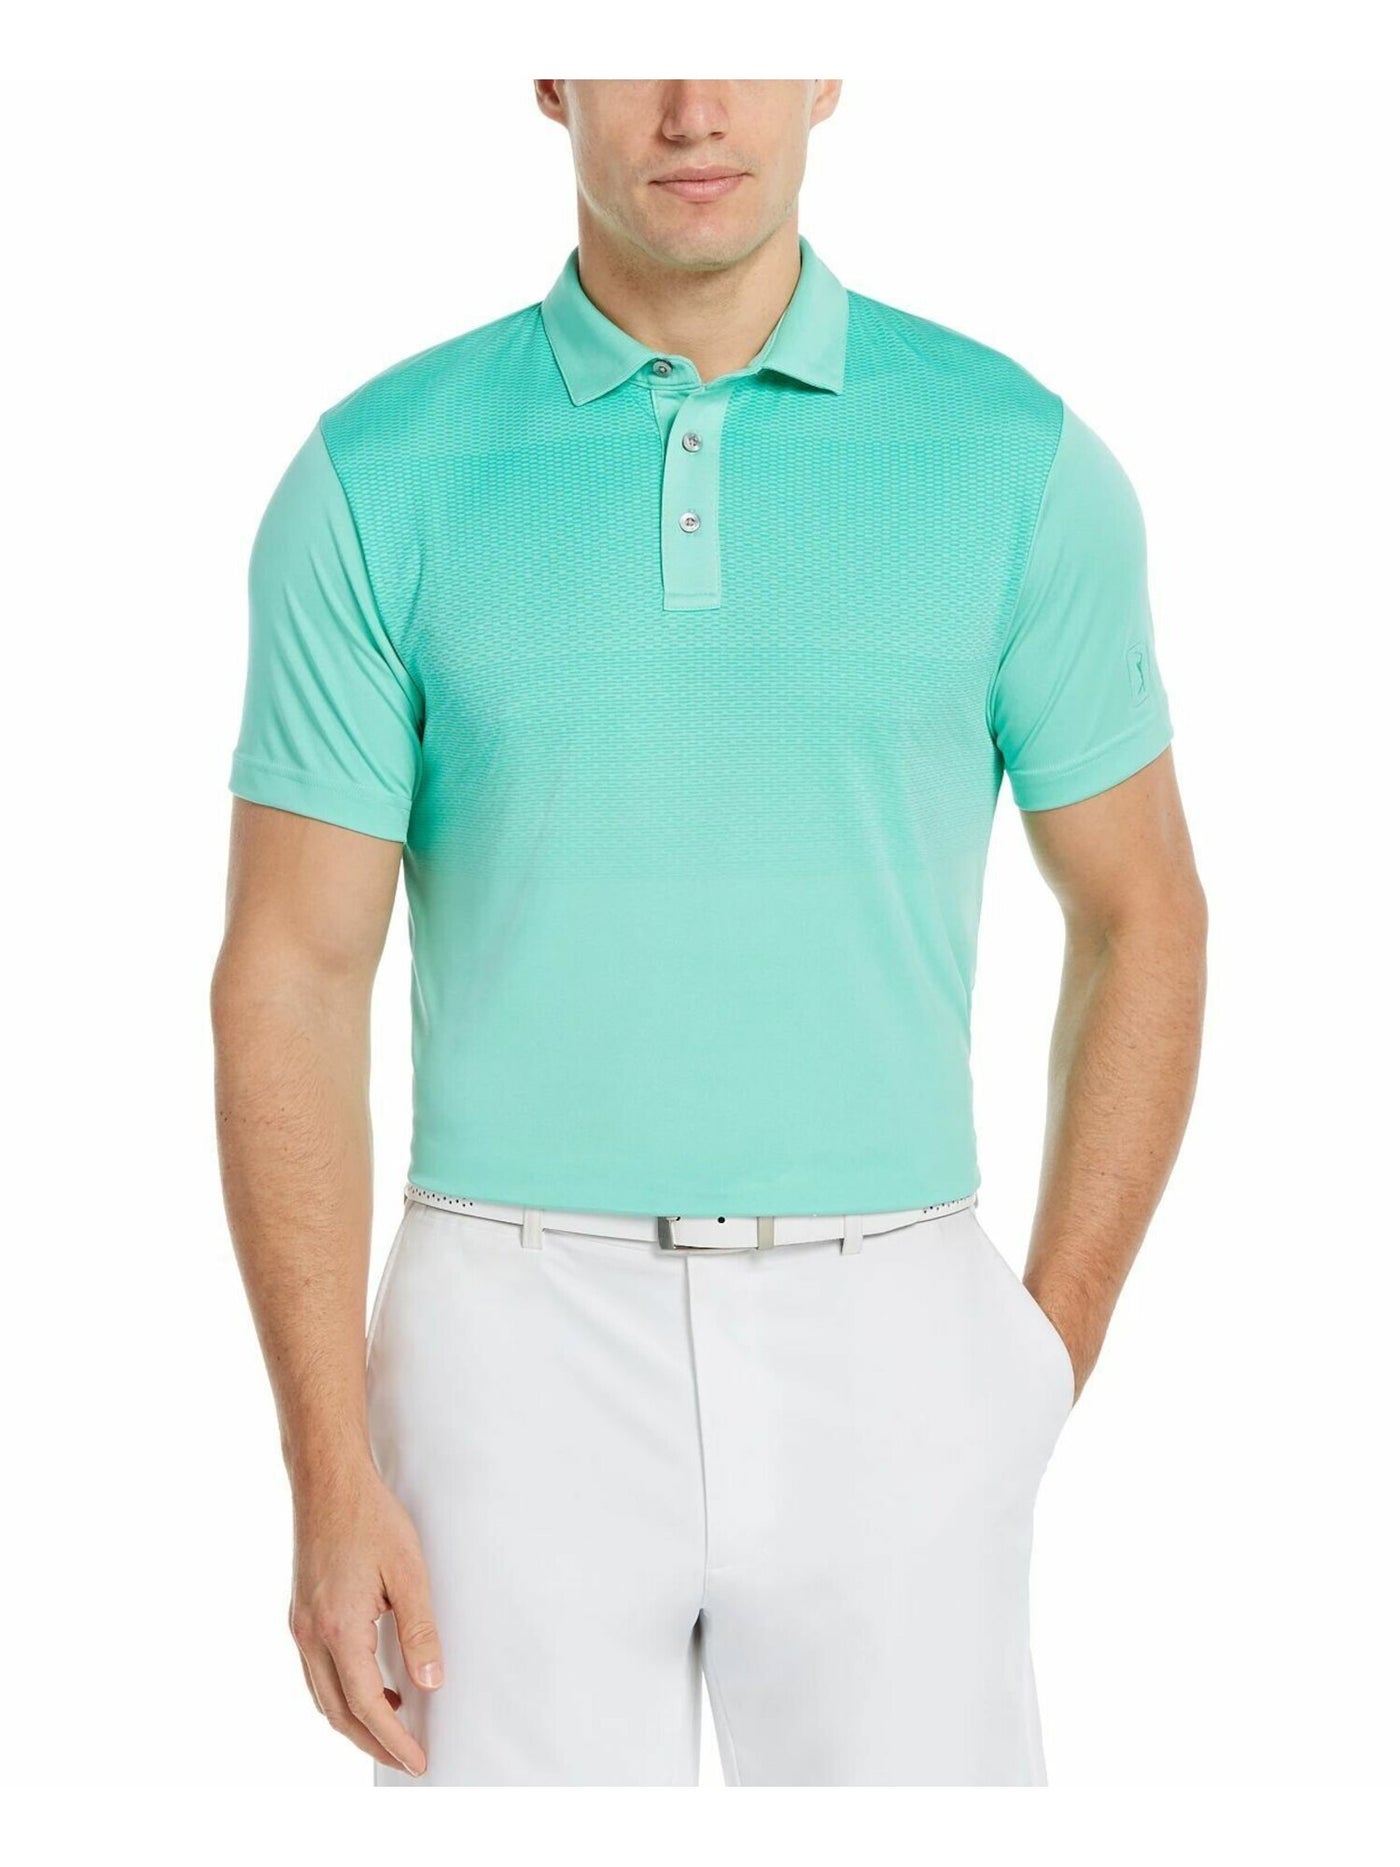 HYBRID APPAREL Mens Green Printed Classic Fit Stretch Polo L